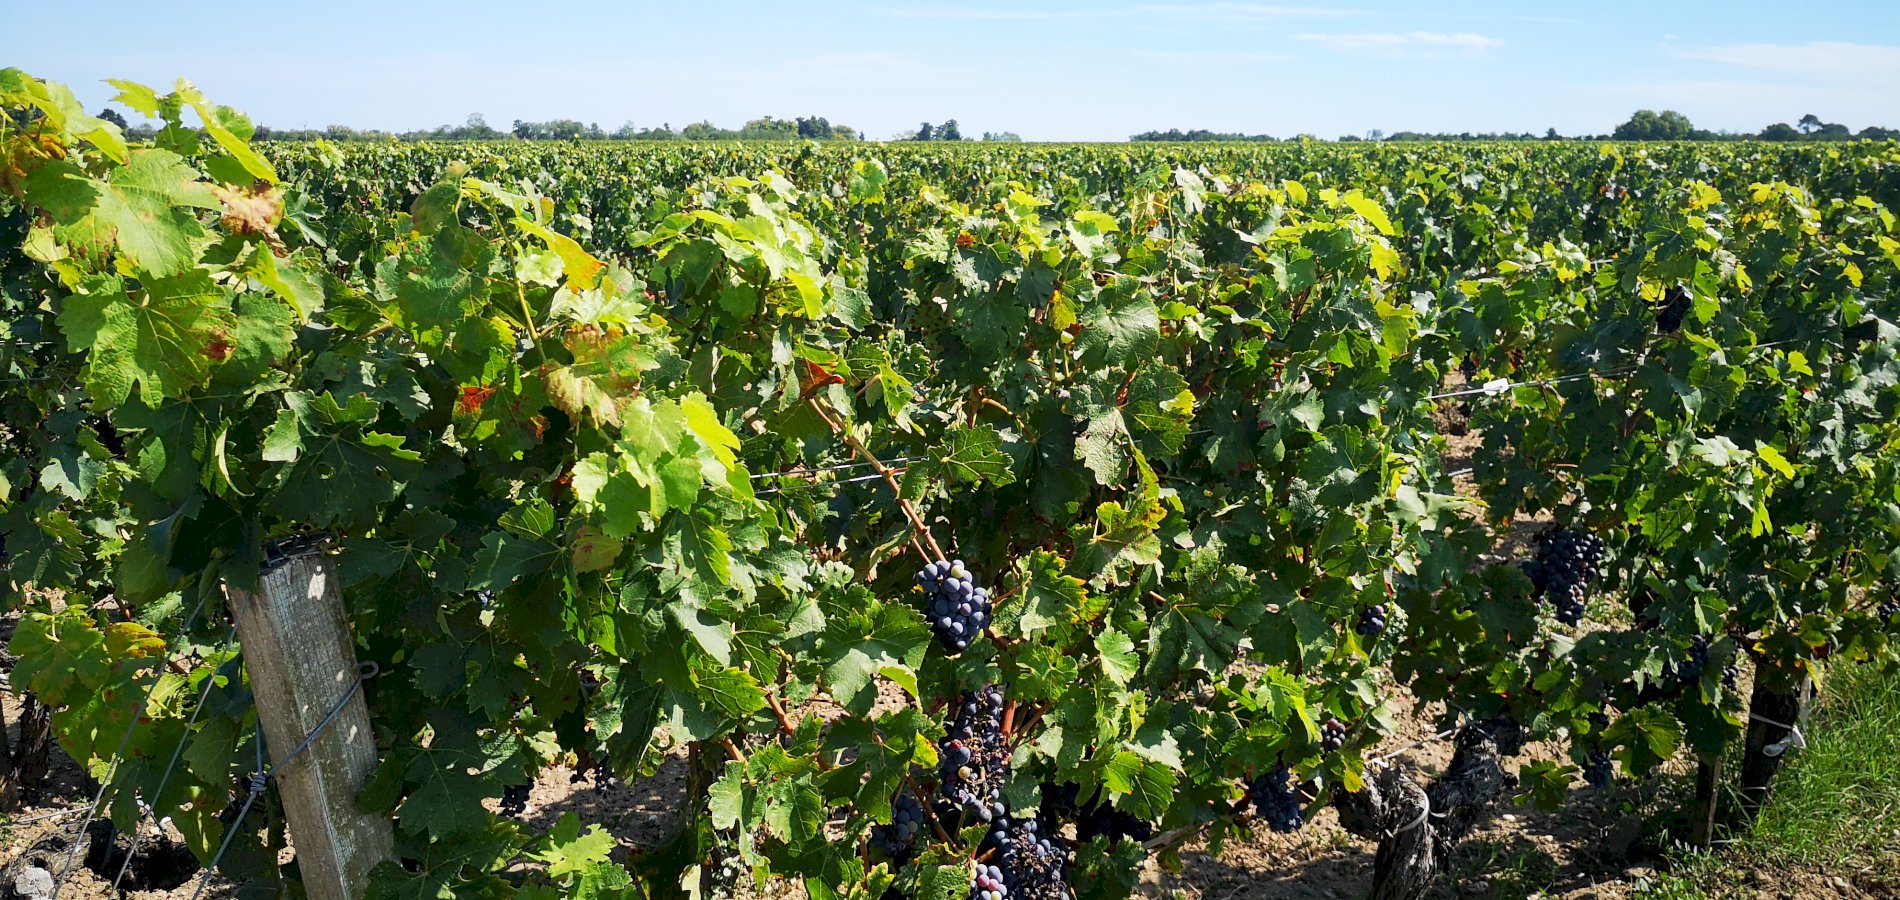 Ophorus Tours - A Private Bordeaux Wine Tour to Medoc Half day Trip for 2 persons